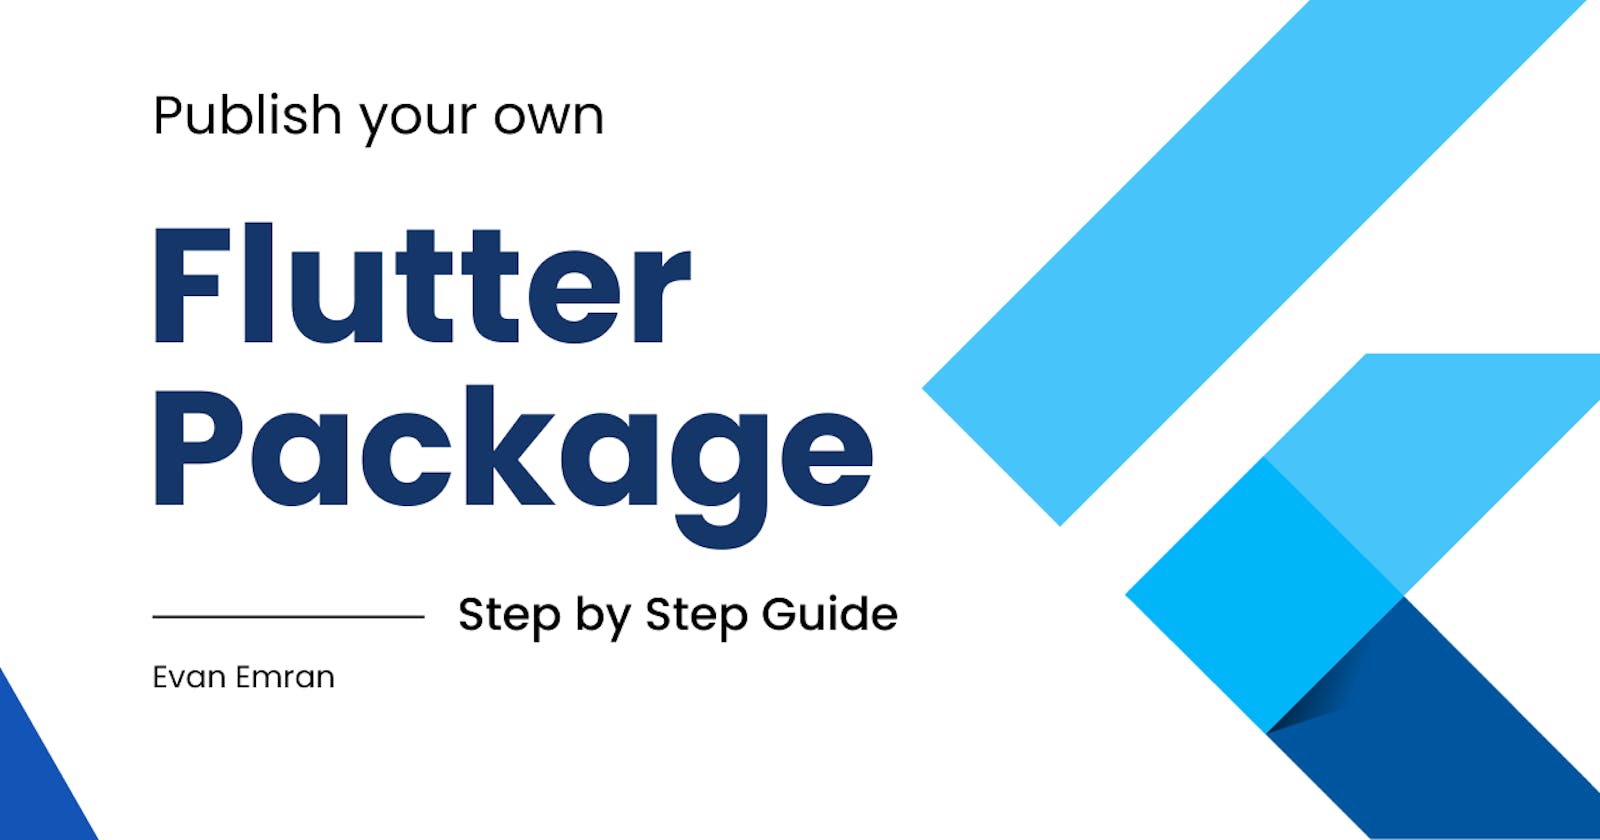 How to Publish Your Own Flutter Package